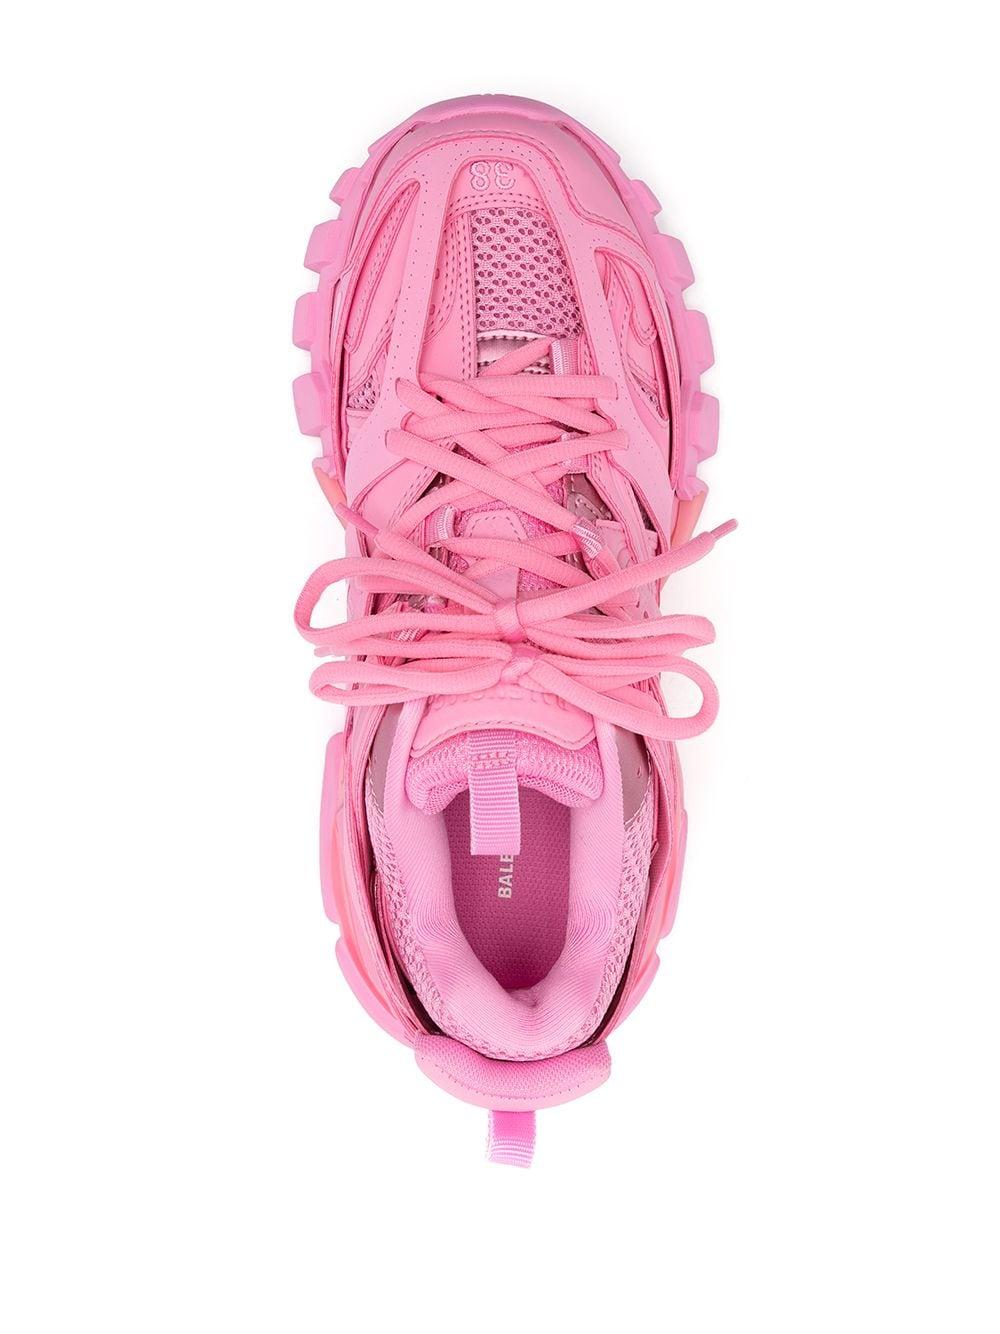 Balenciaga Track Lace-up Sneakers in Pink | Lyst